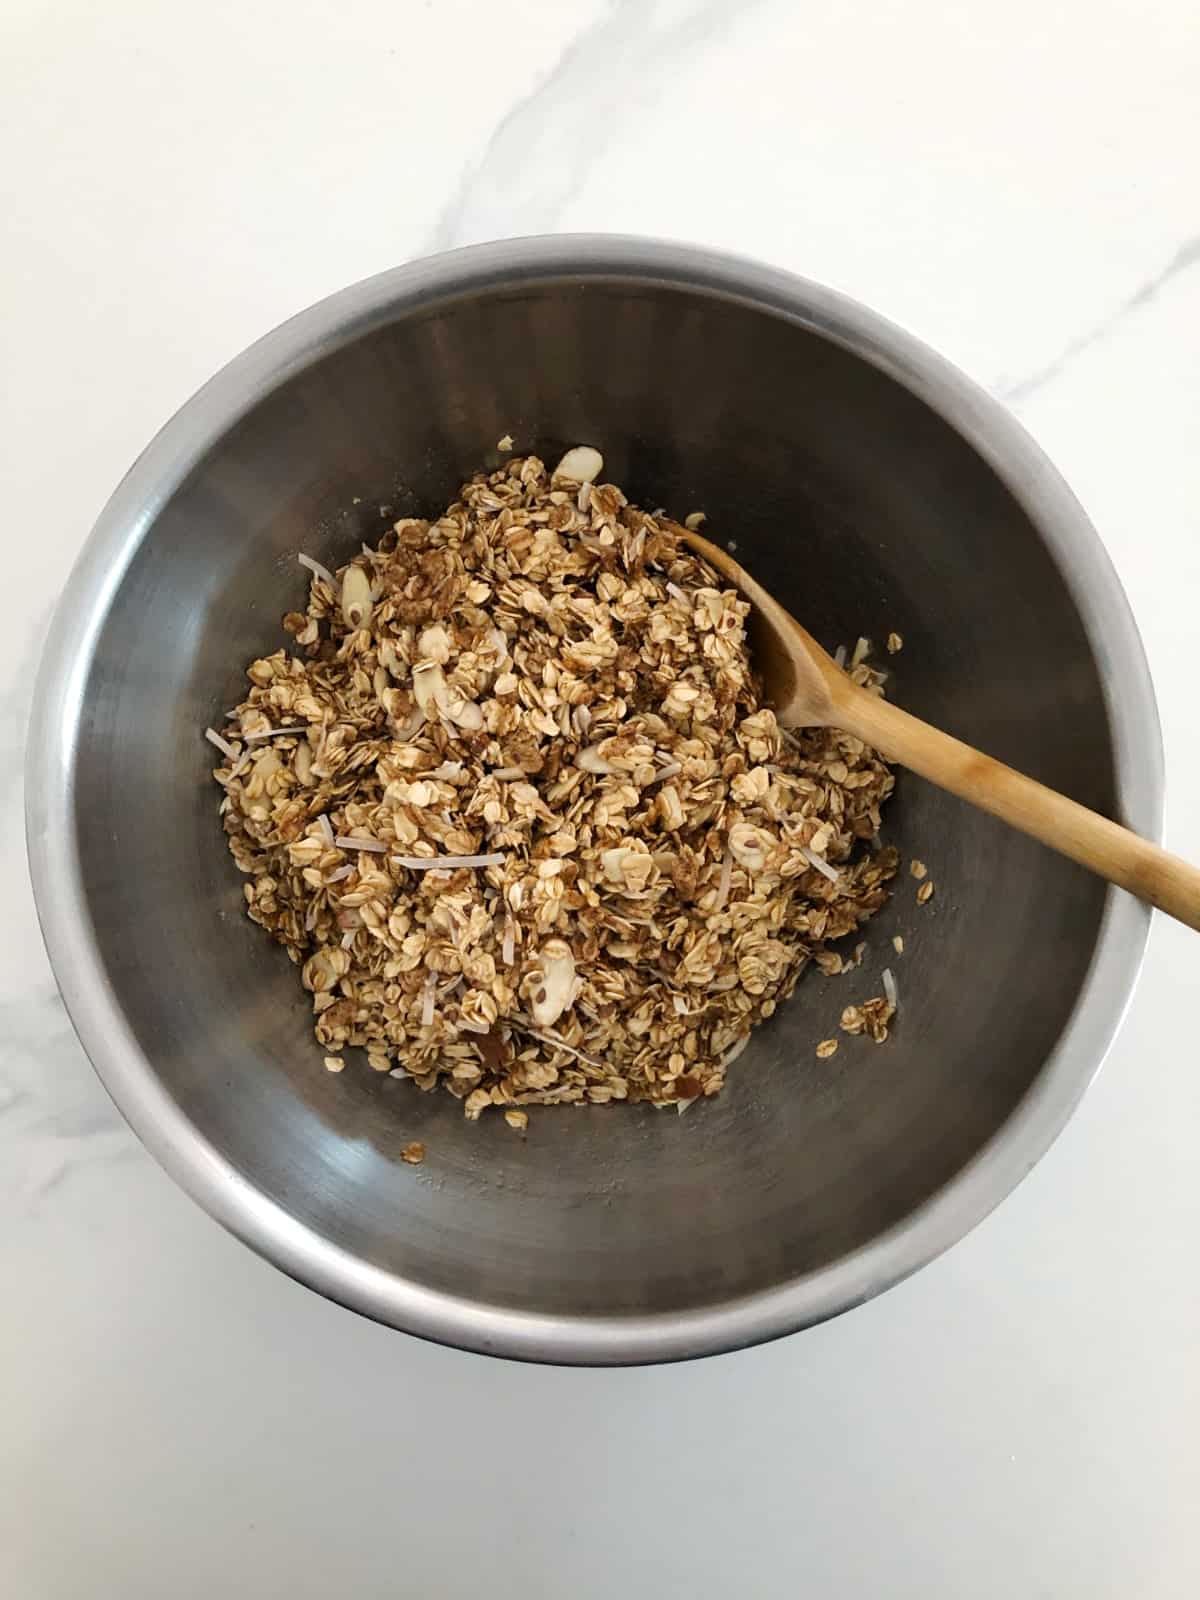 Stirring almond granola in mixing bowl with wooden spoon.